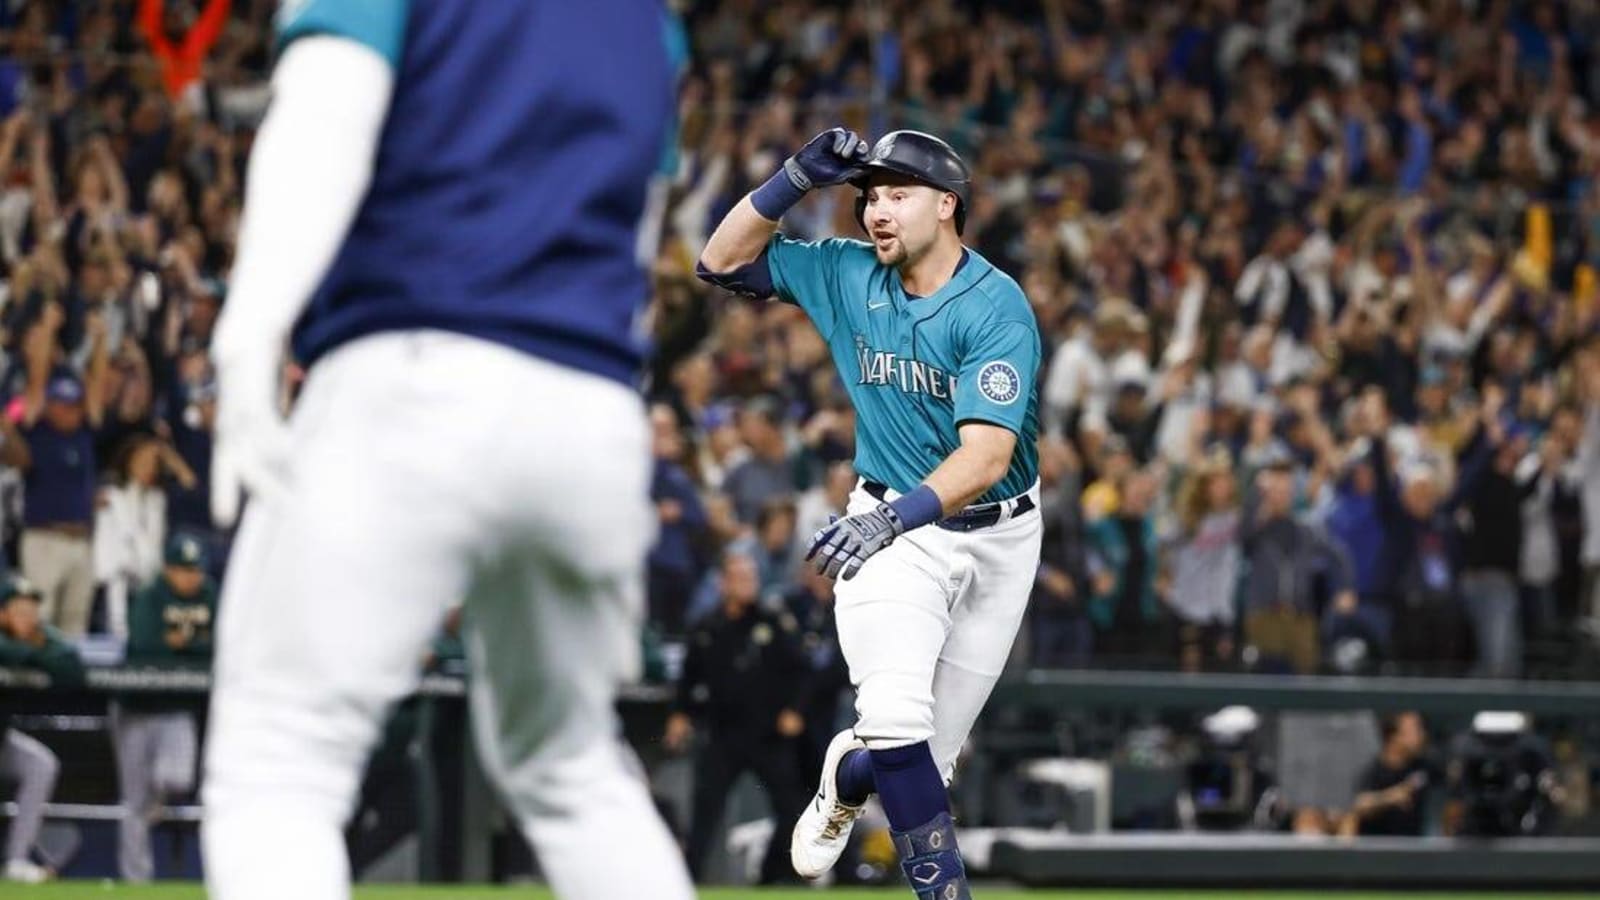 After clincher, Mariners look to improve wild-card position